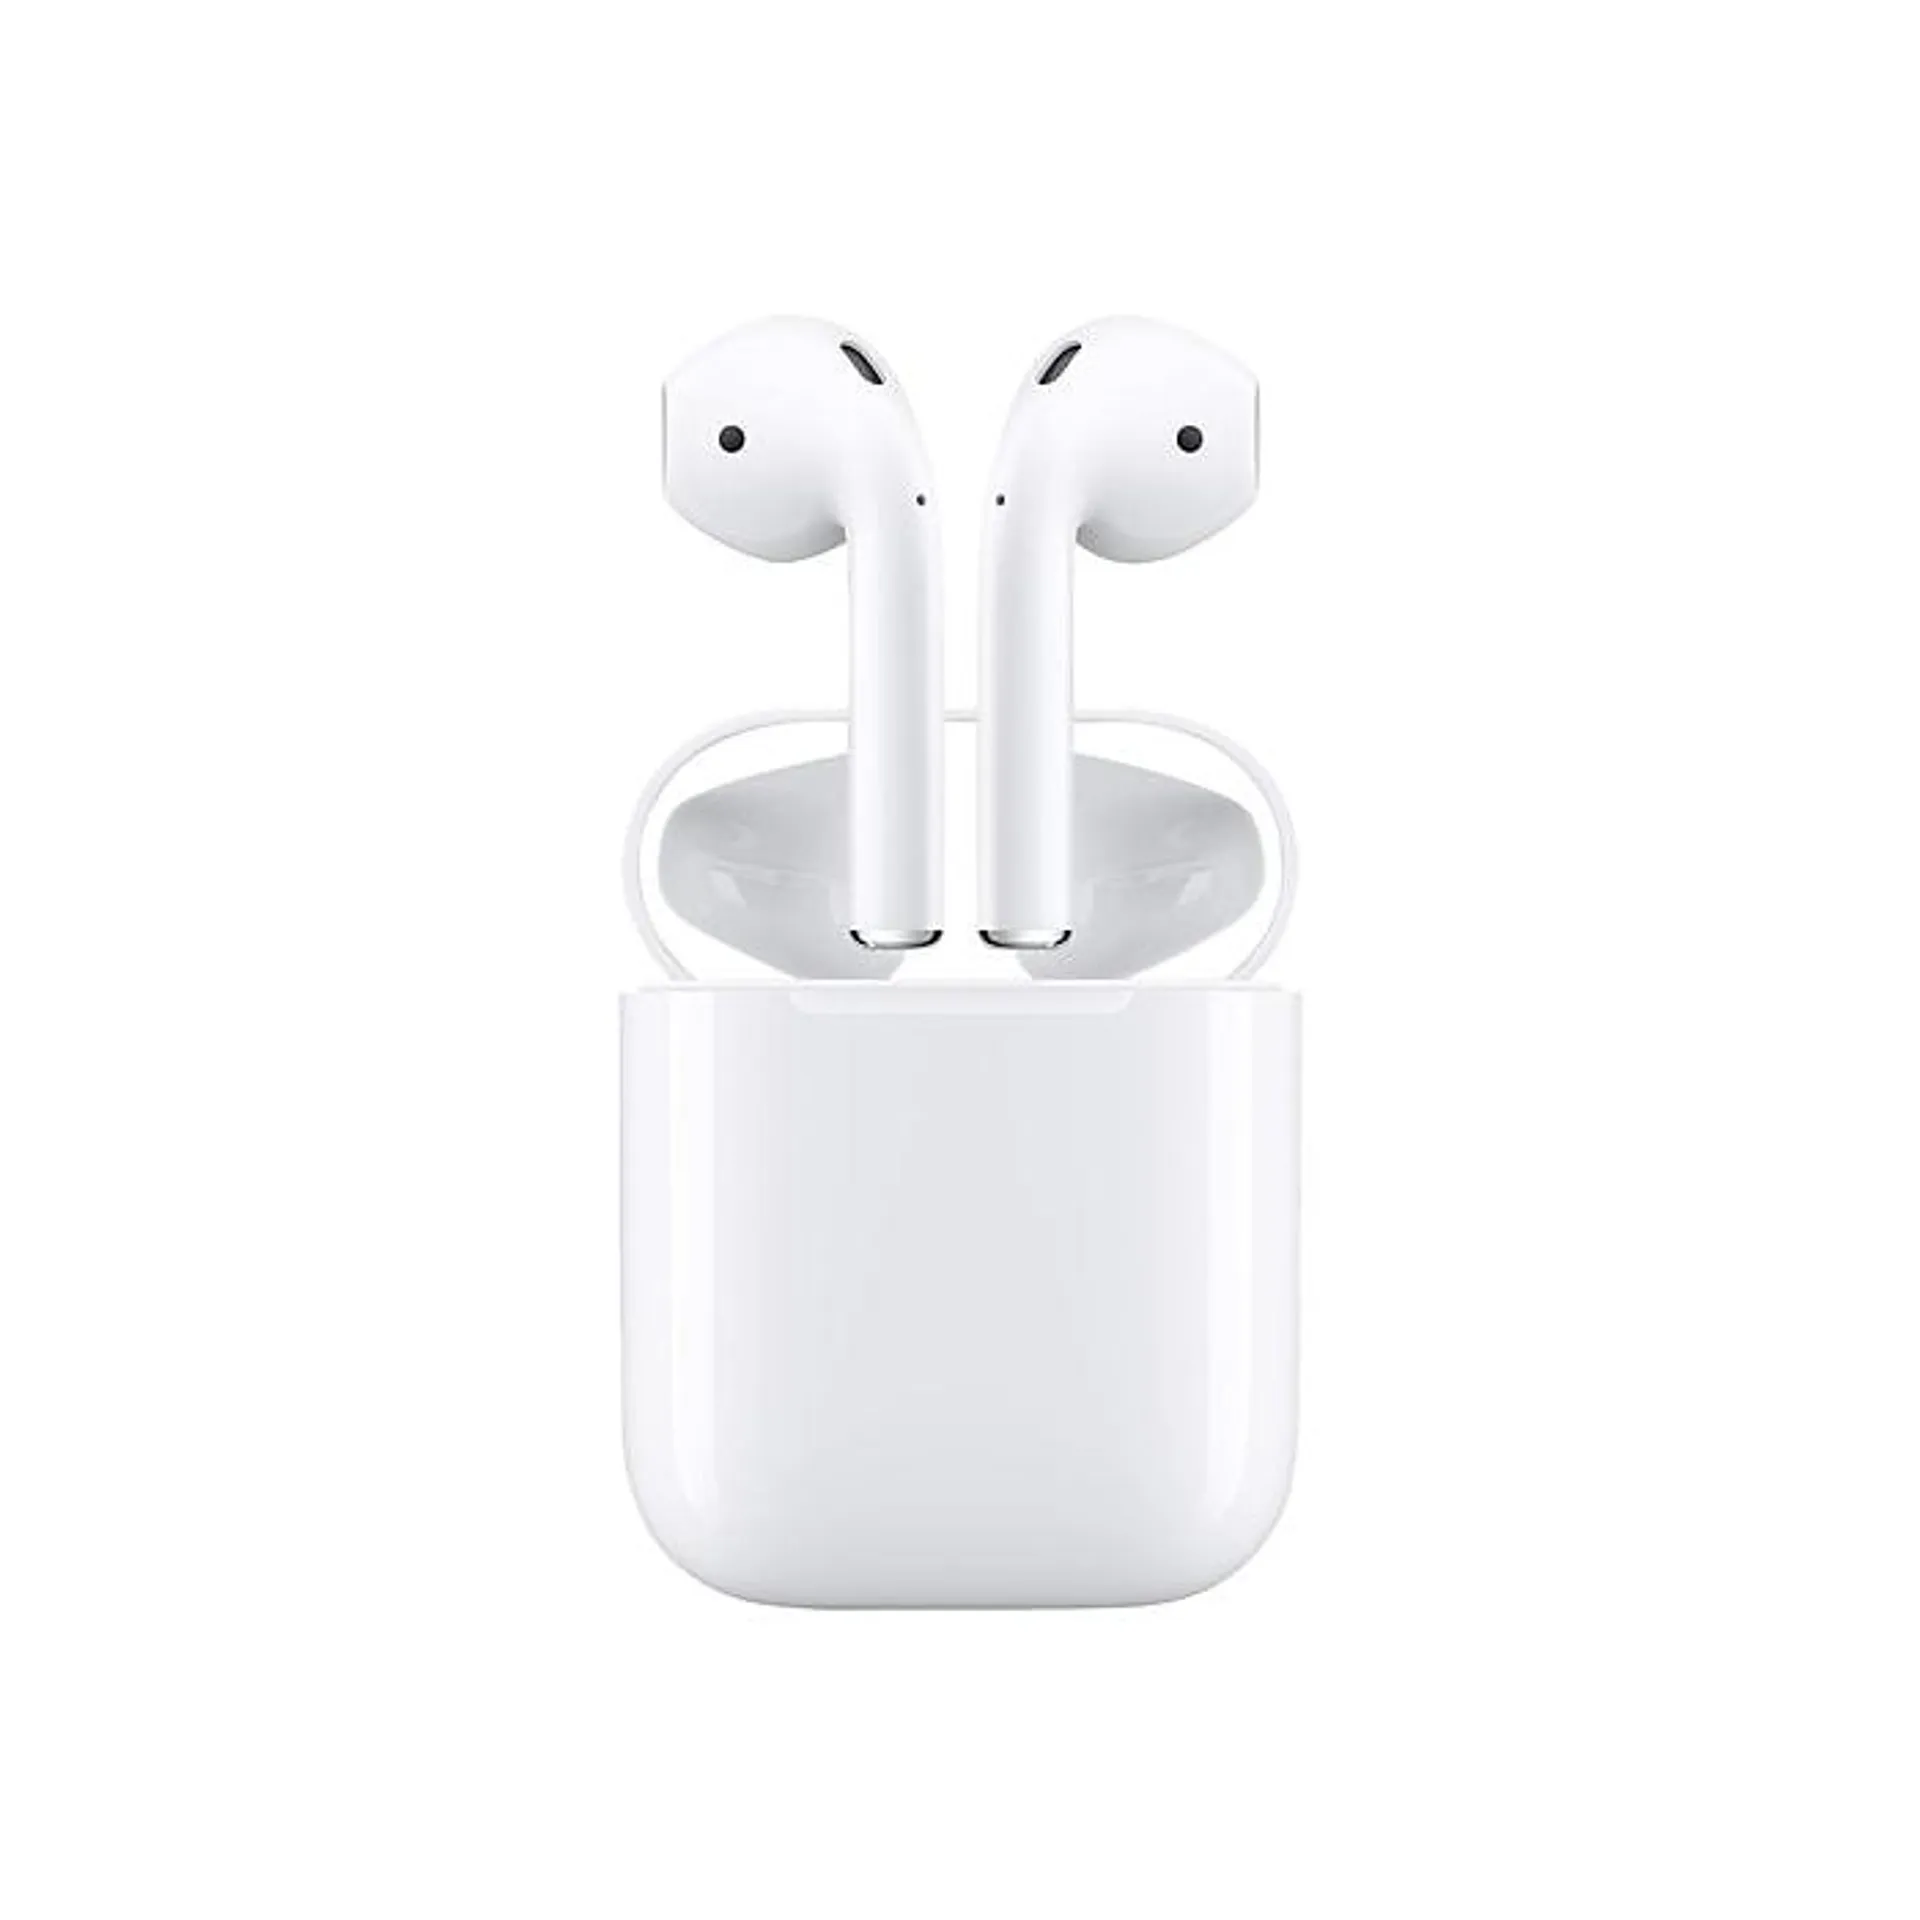 Apple AirPods (2nd Generation) Bluetooth Earbuds,